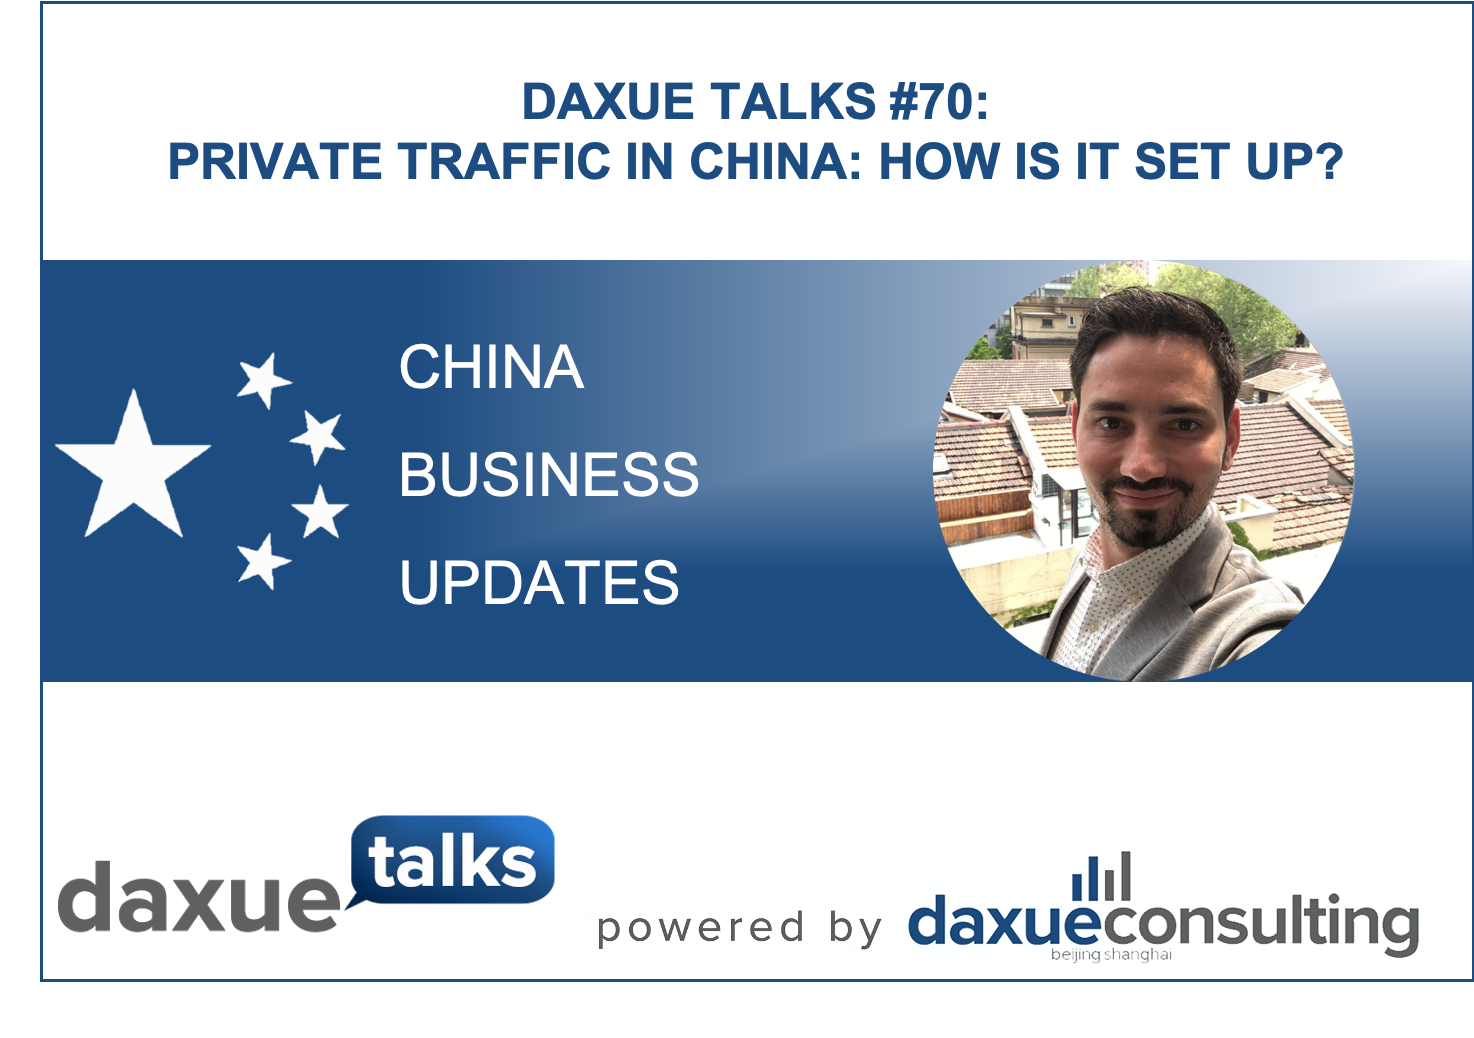 Daxue Talks 70: Private traffic in China: how is it set up?